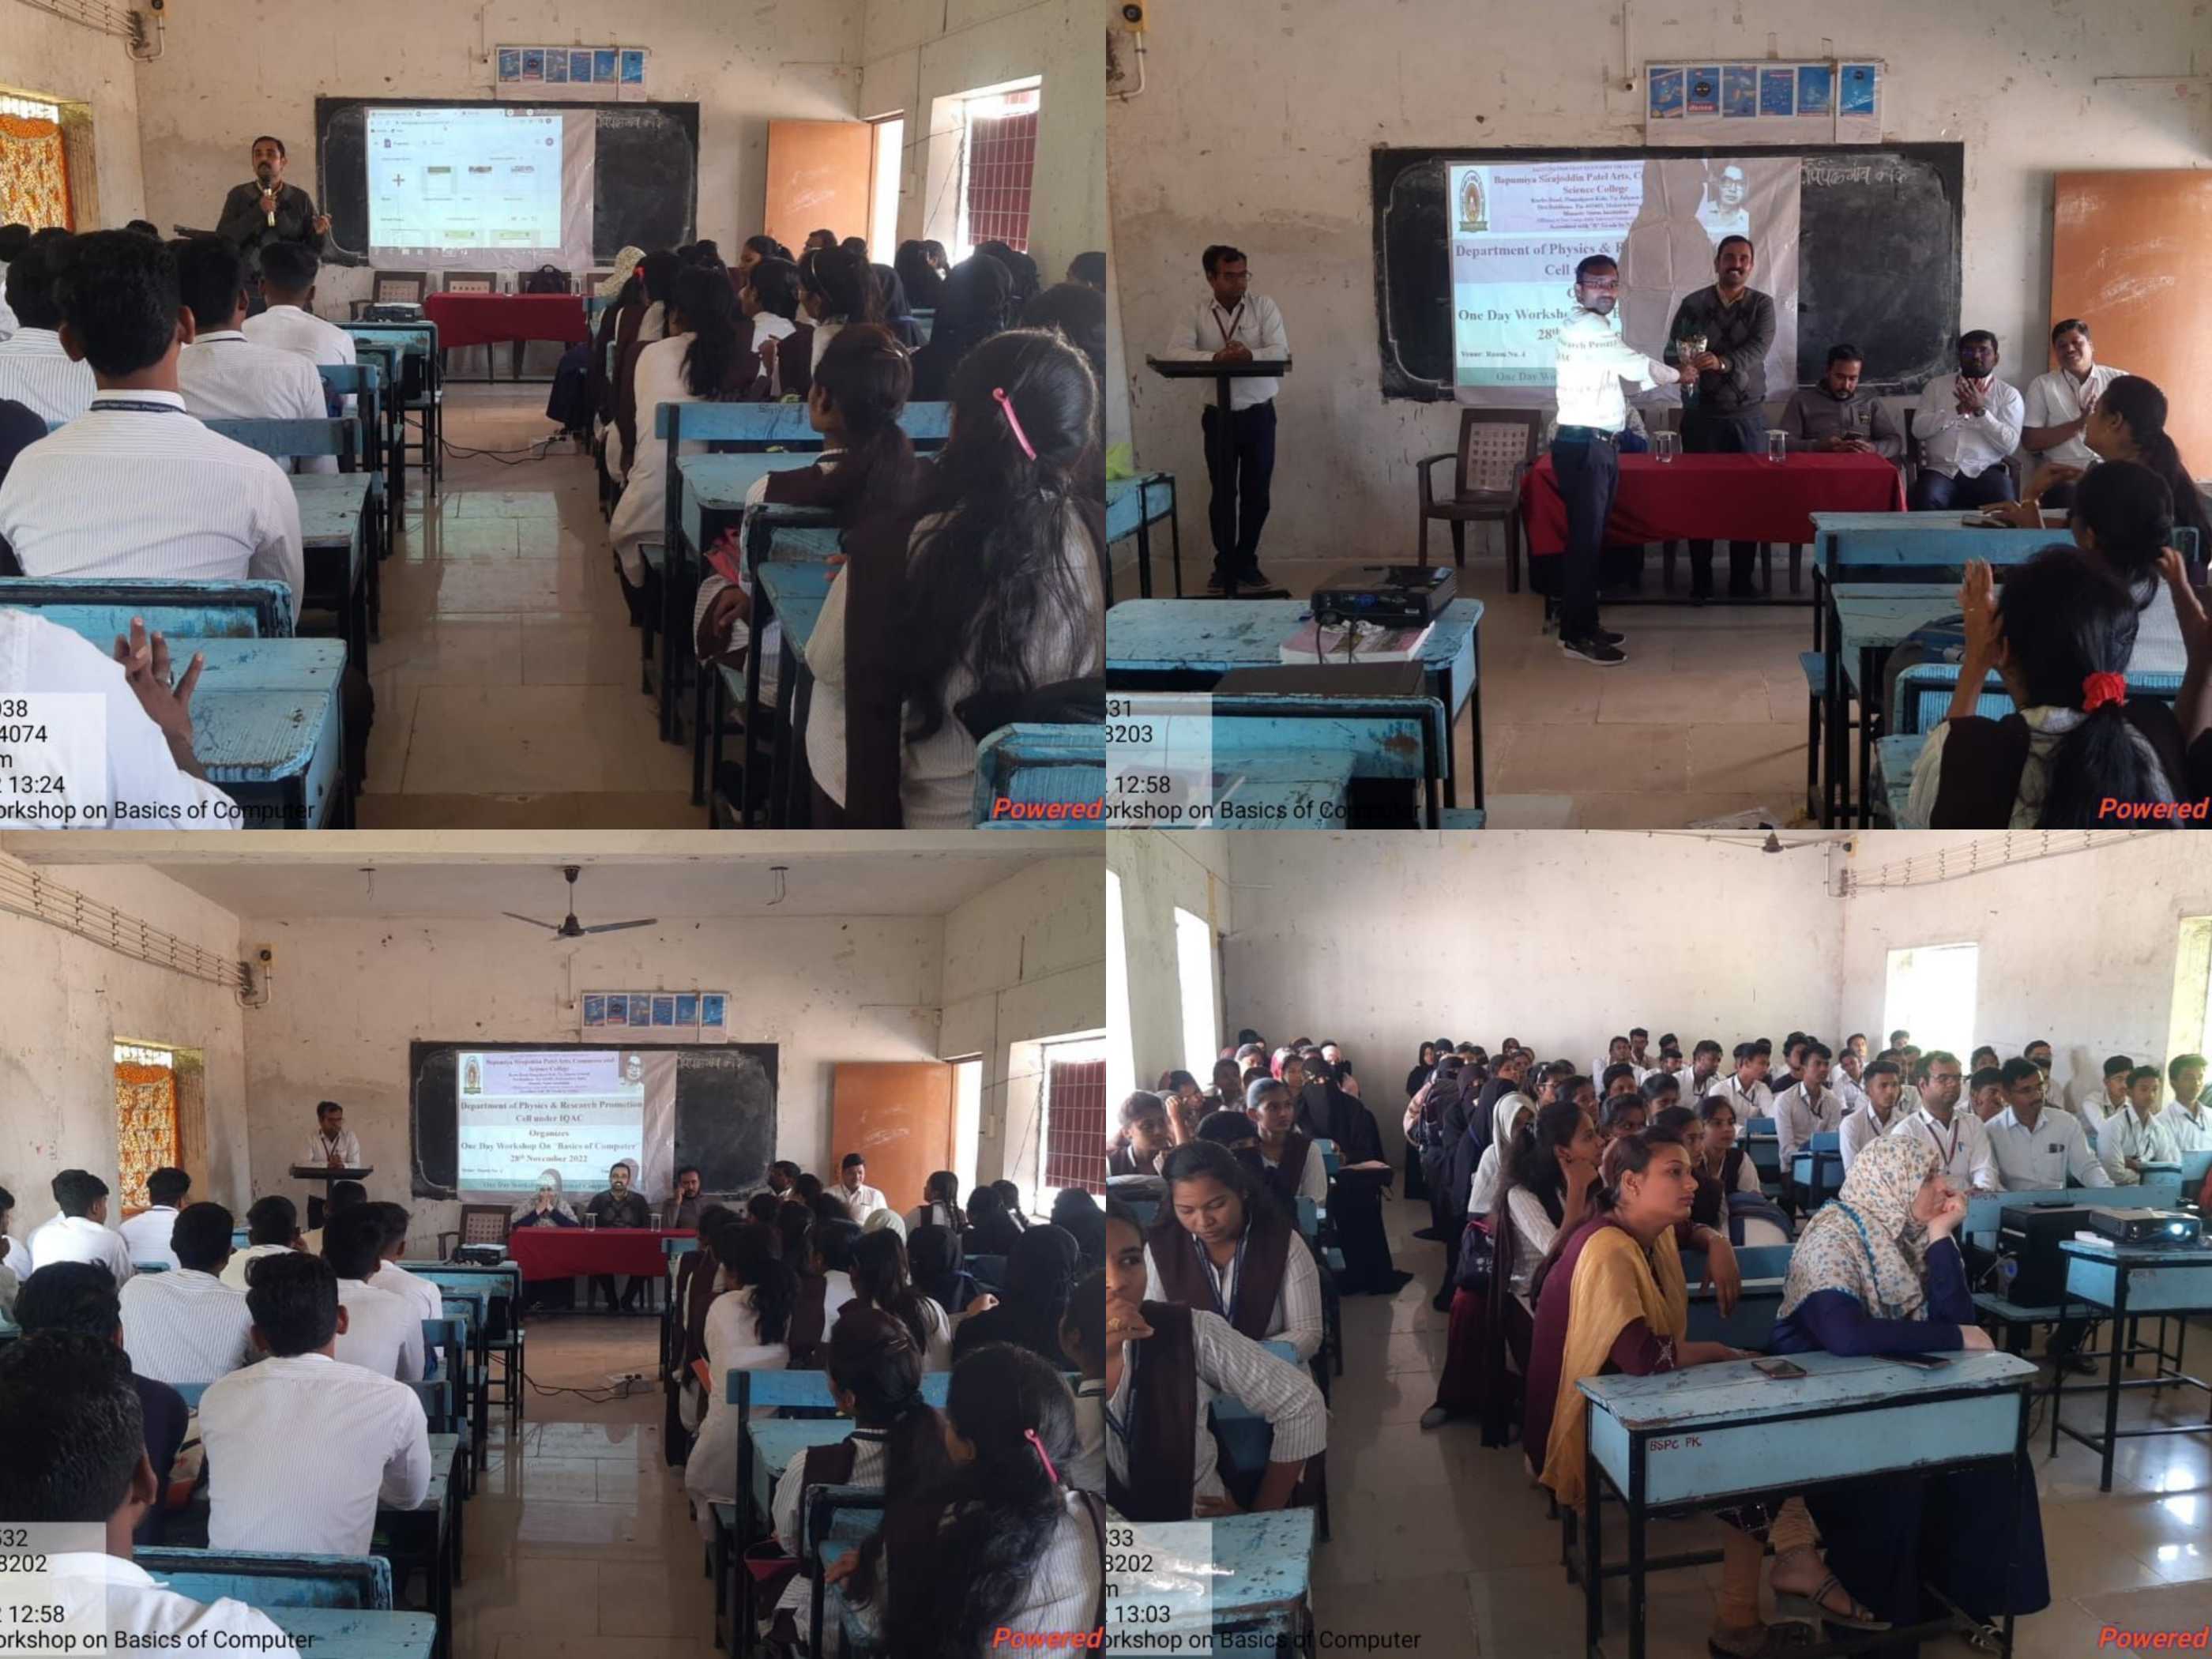 One Day Workshop On Basics of Computer organized by Department of Physics 2022